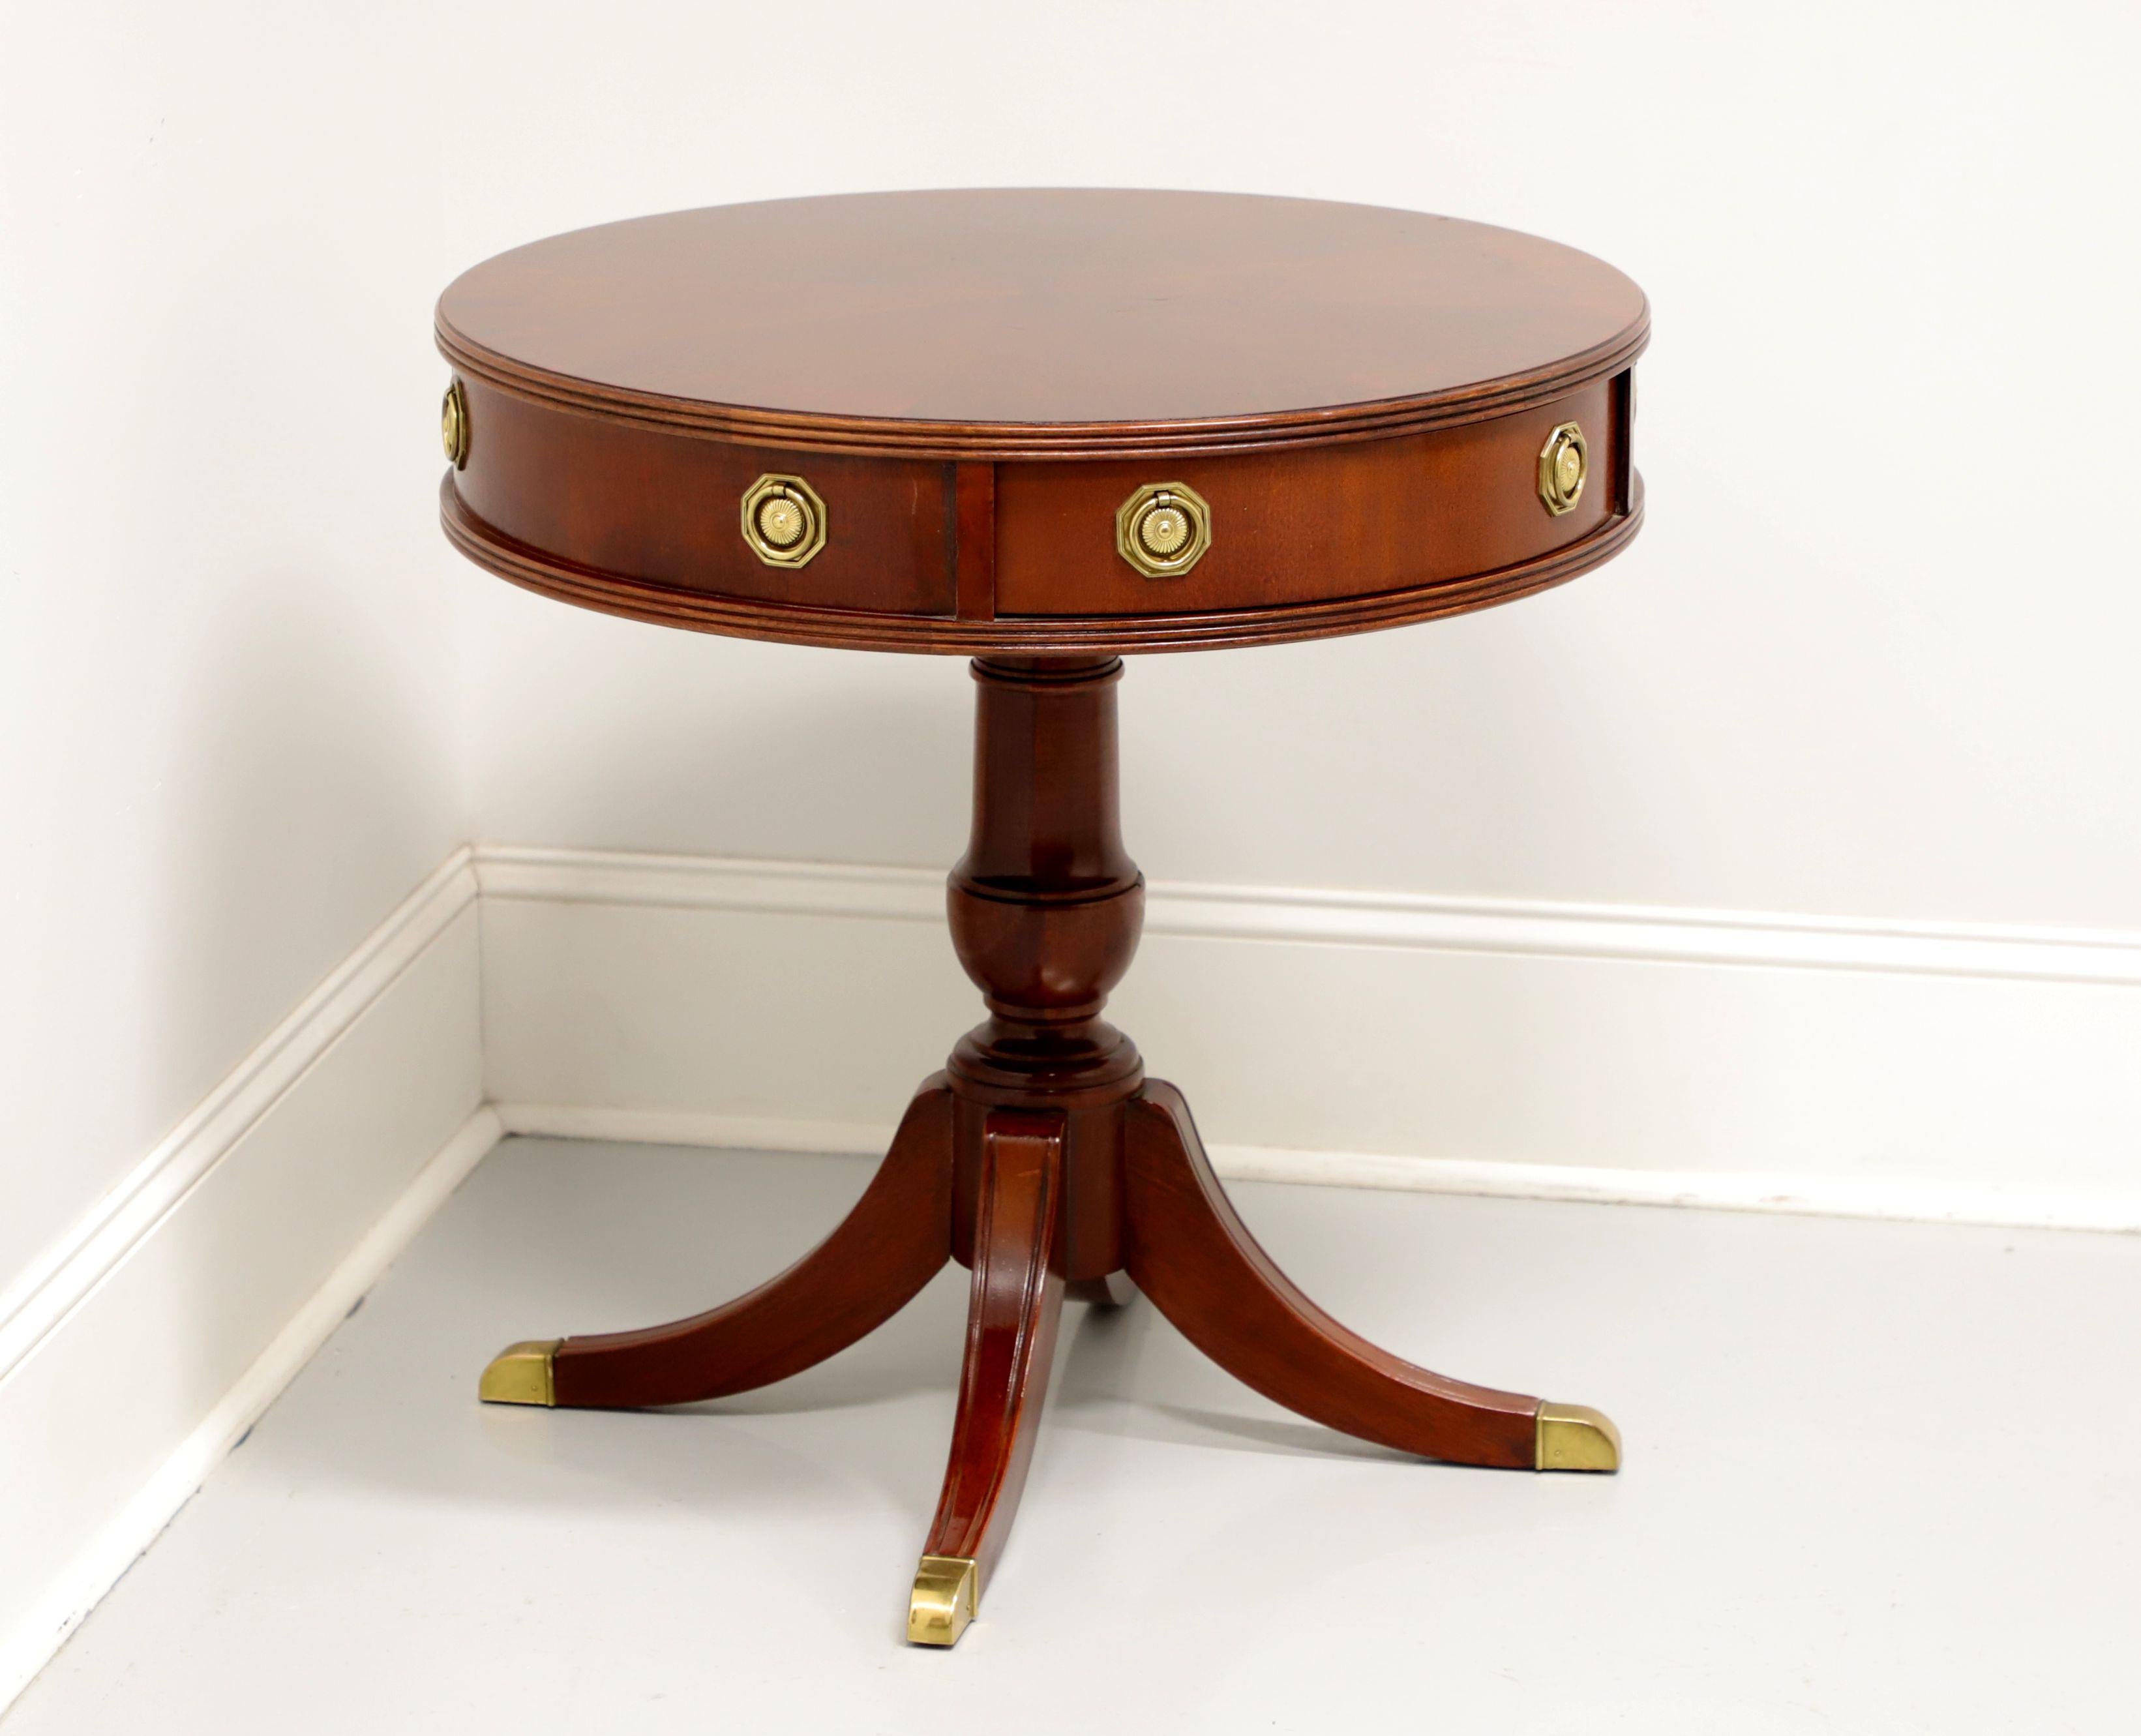 A Traditional style round drum table by Hammary Furniture. Mahogany with banded & inlaid top, brass hardware, turned pedestal base and four legs with brass toe caps. Features one working dovetail drawer and three faux drawer fronts. Likely made in